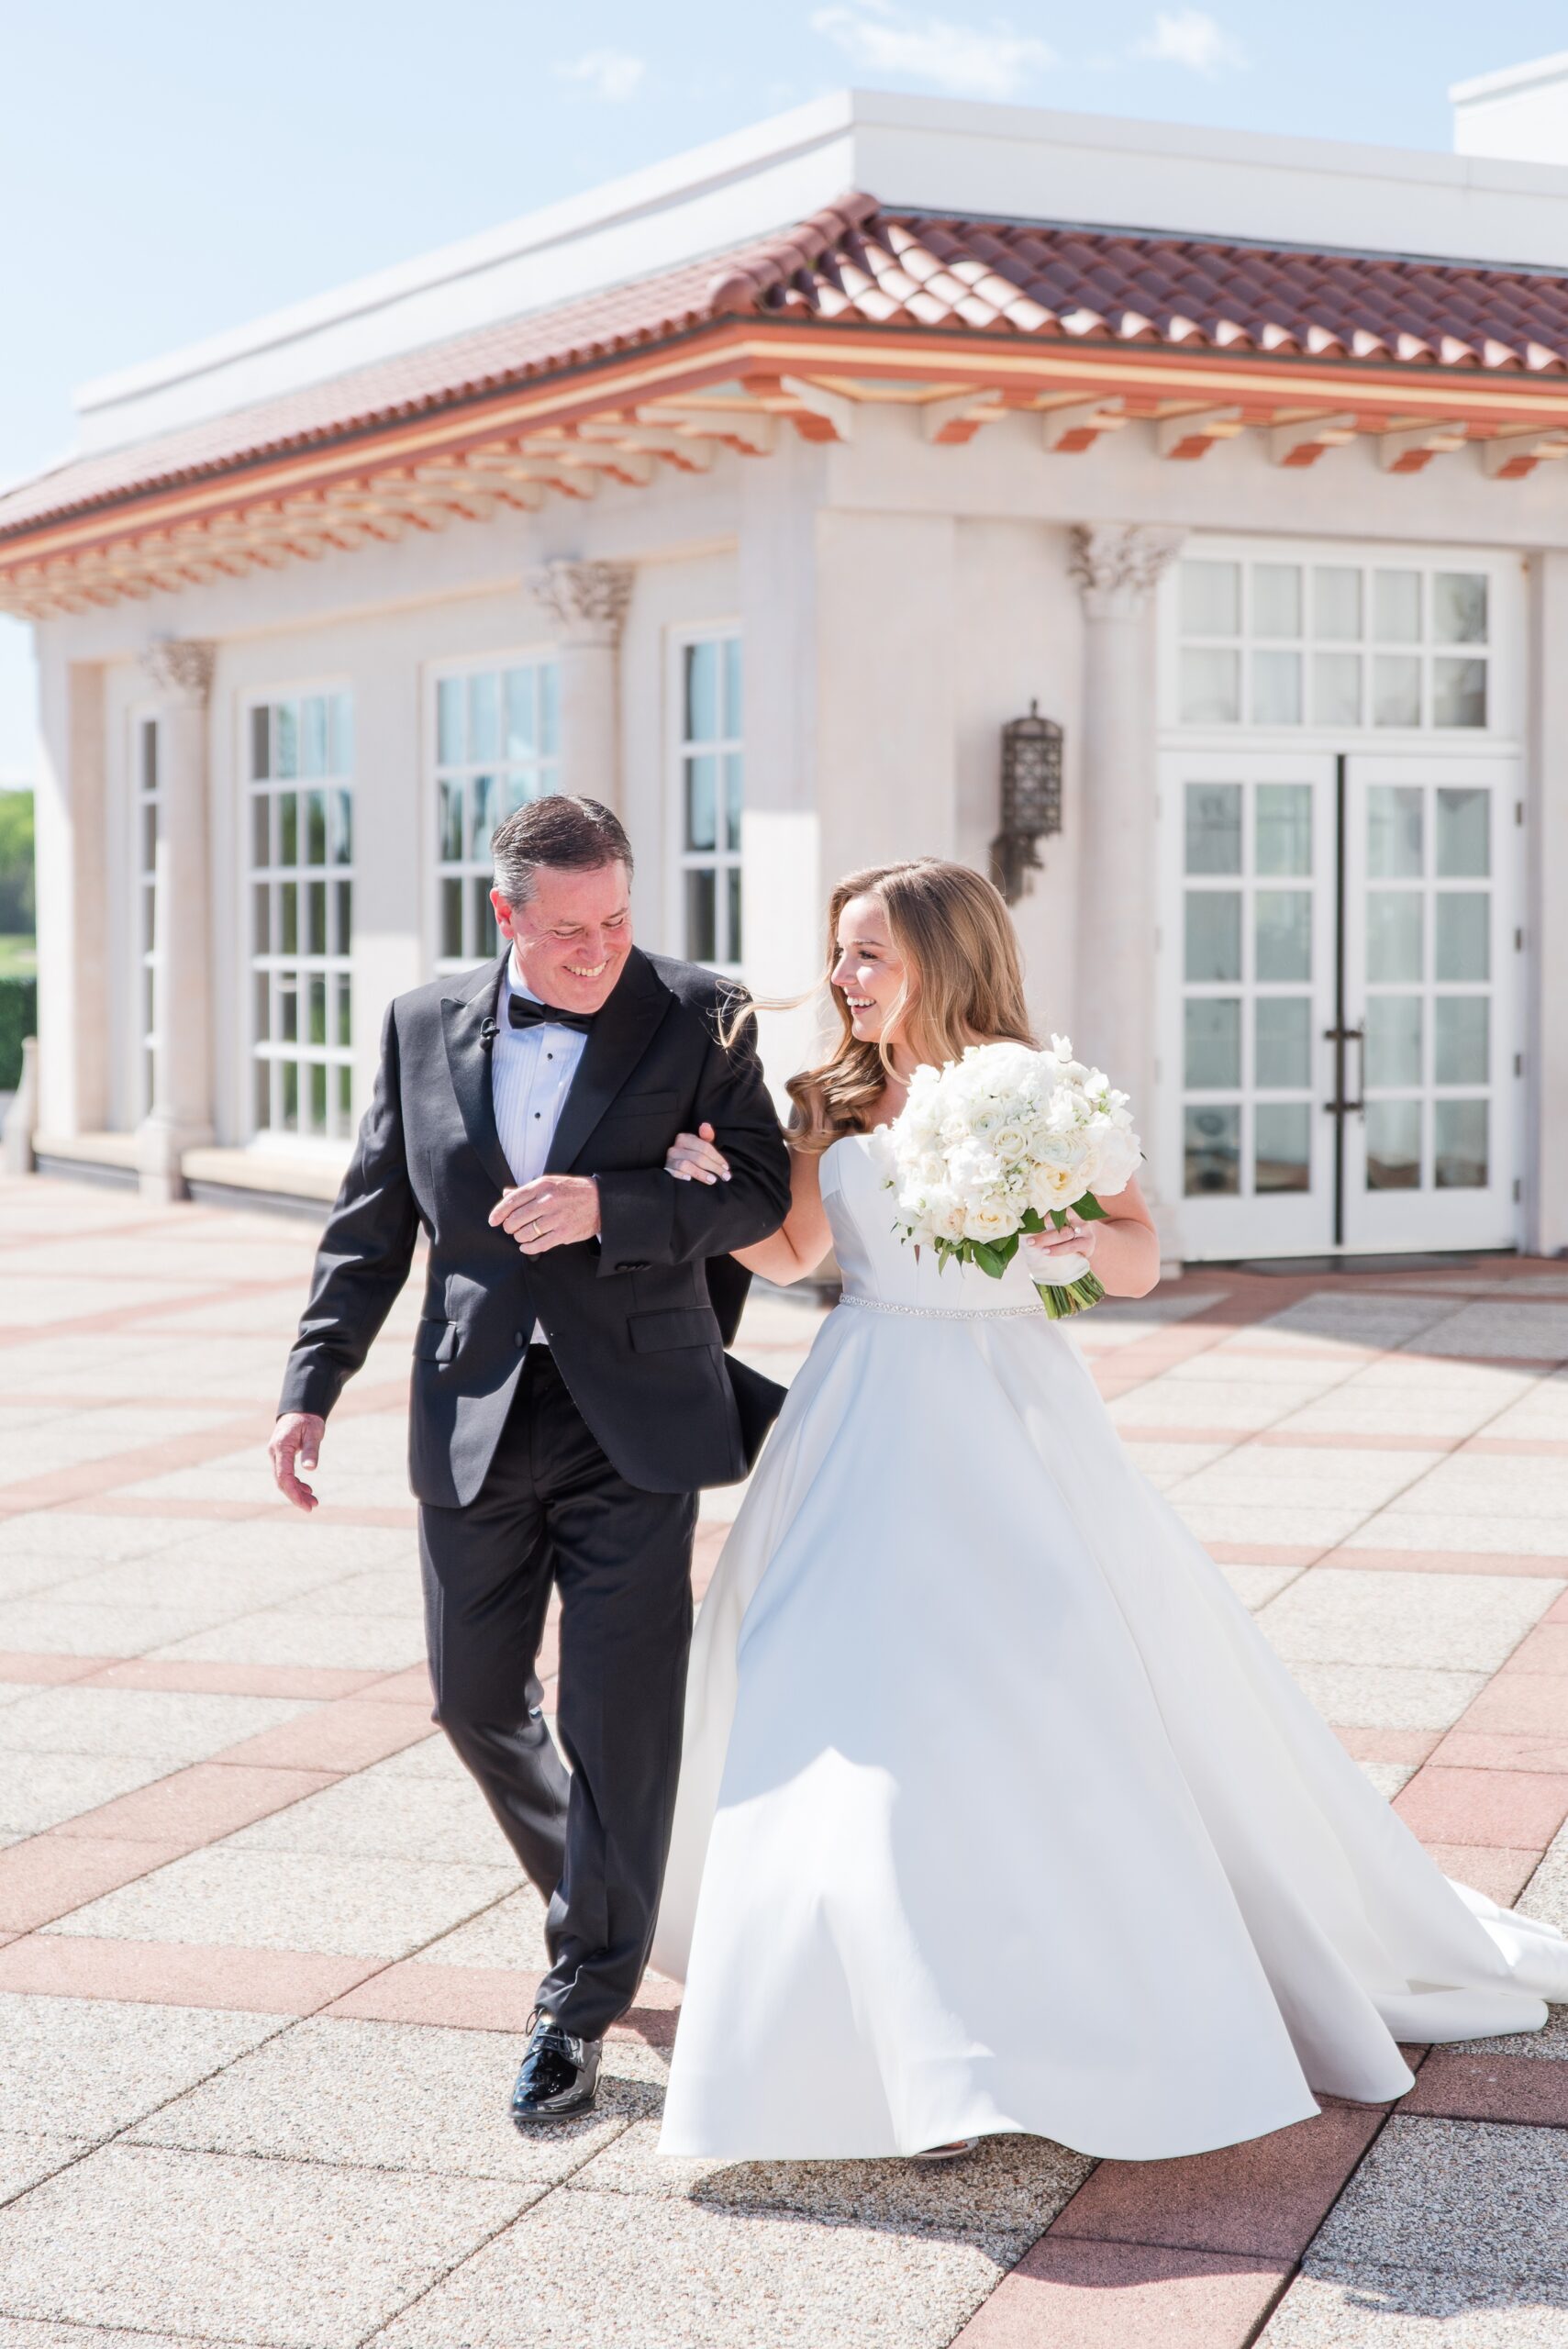 A father in a black suit walks his daughter down the aisle to her wedding